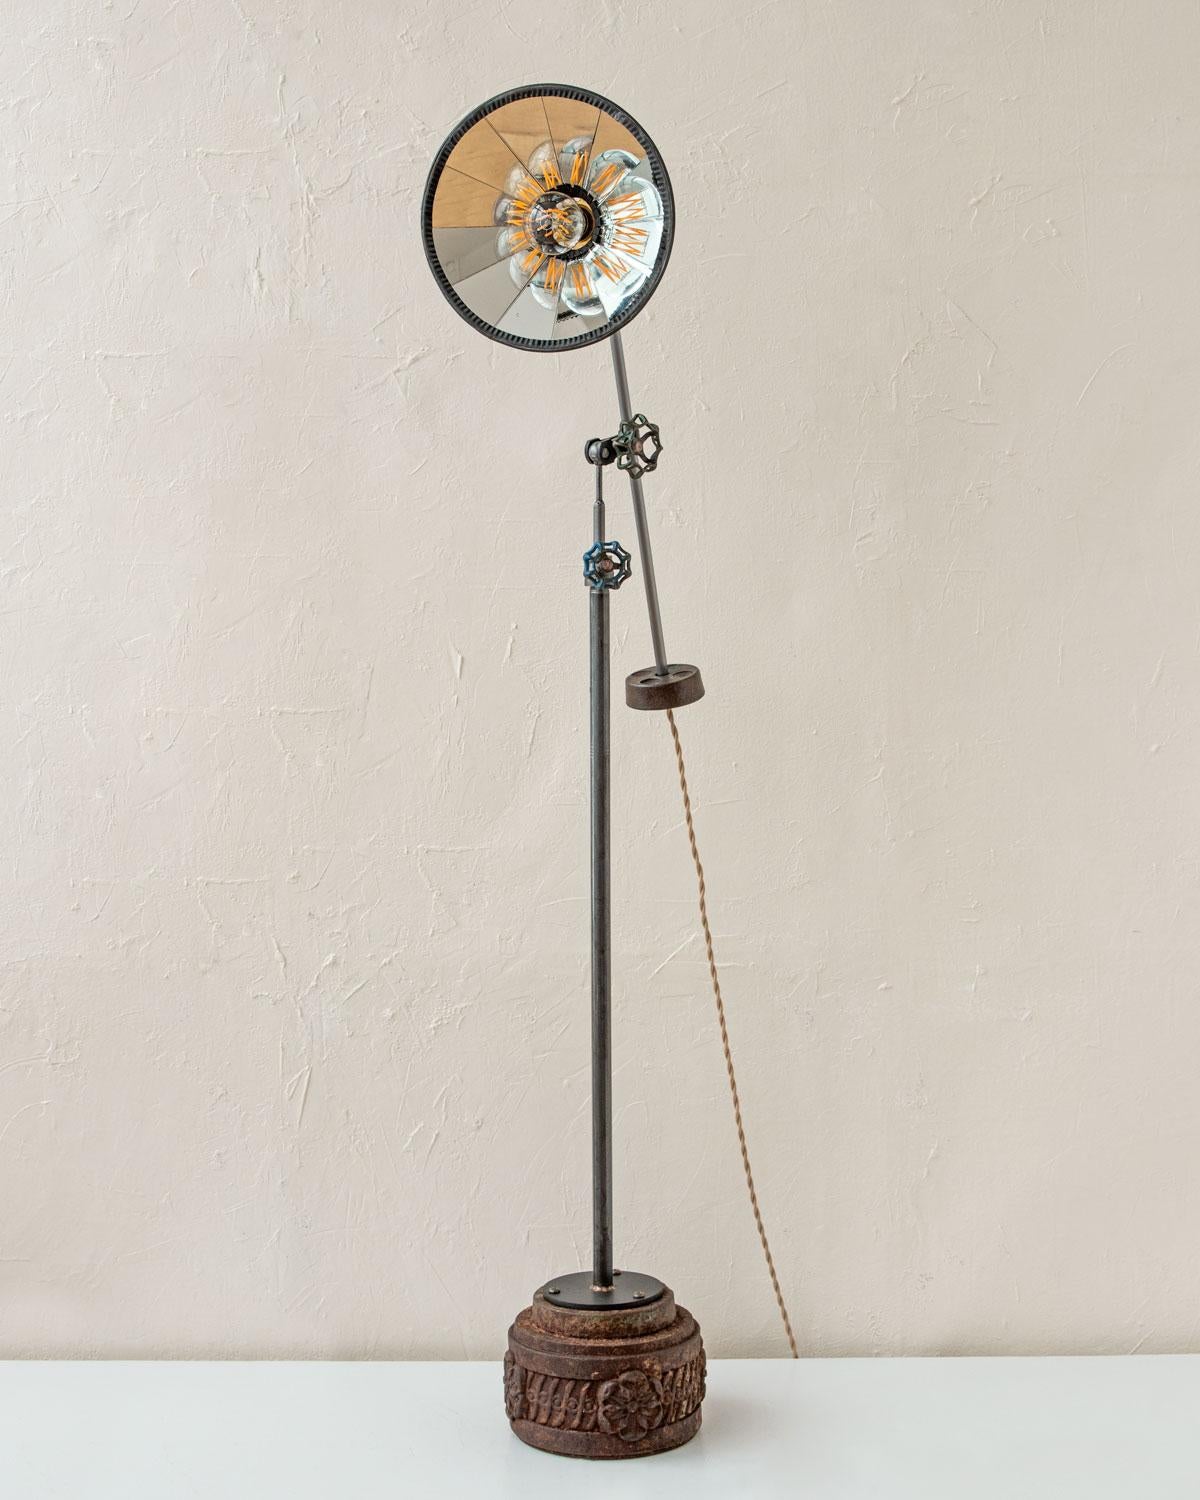 Robert True Ogden's one-of-a-like Found Object Lamps are made by hand in Philadelphia. Crafted from pieces and parts sourced locally and abroad, no two lamps are alike. 

This floor lamp has a ribbon glass mirrored shade with an oil-rubbed brass